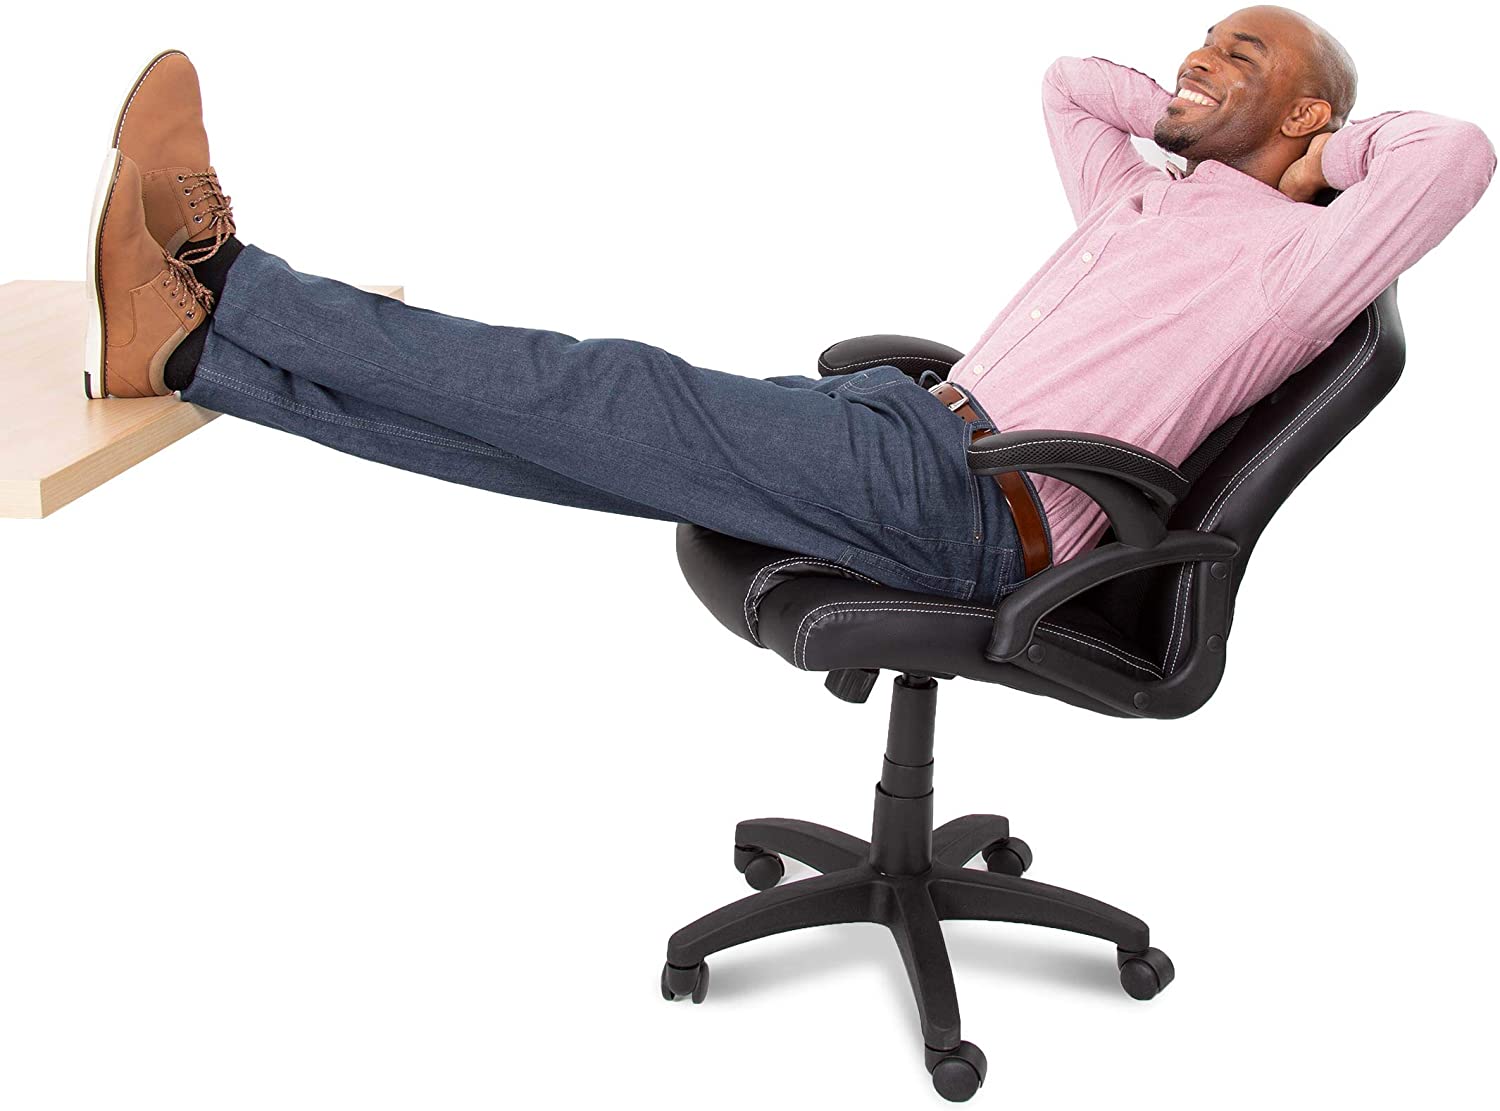 Ergonomic Office Chair | Rolling Desk Chair by Stand Steady